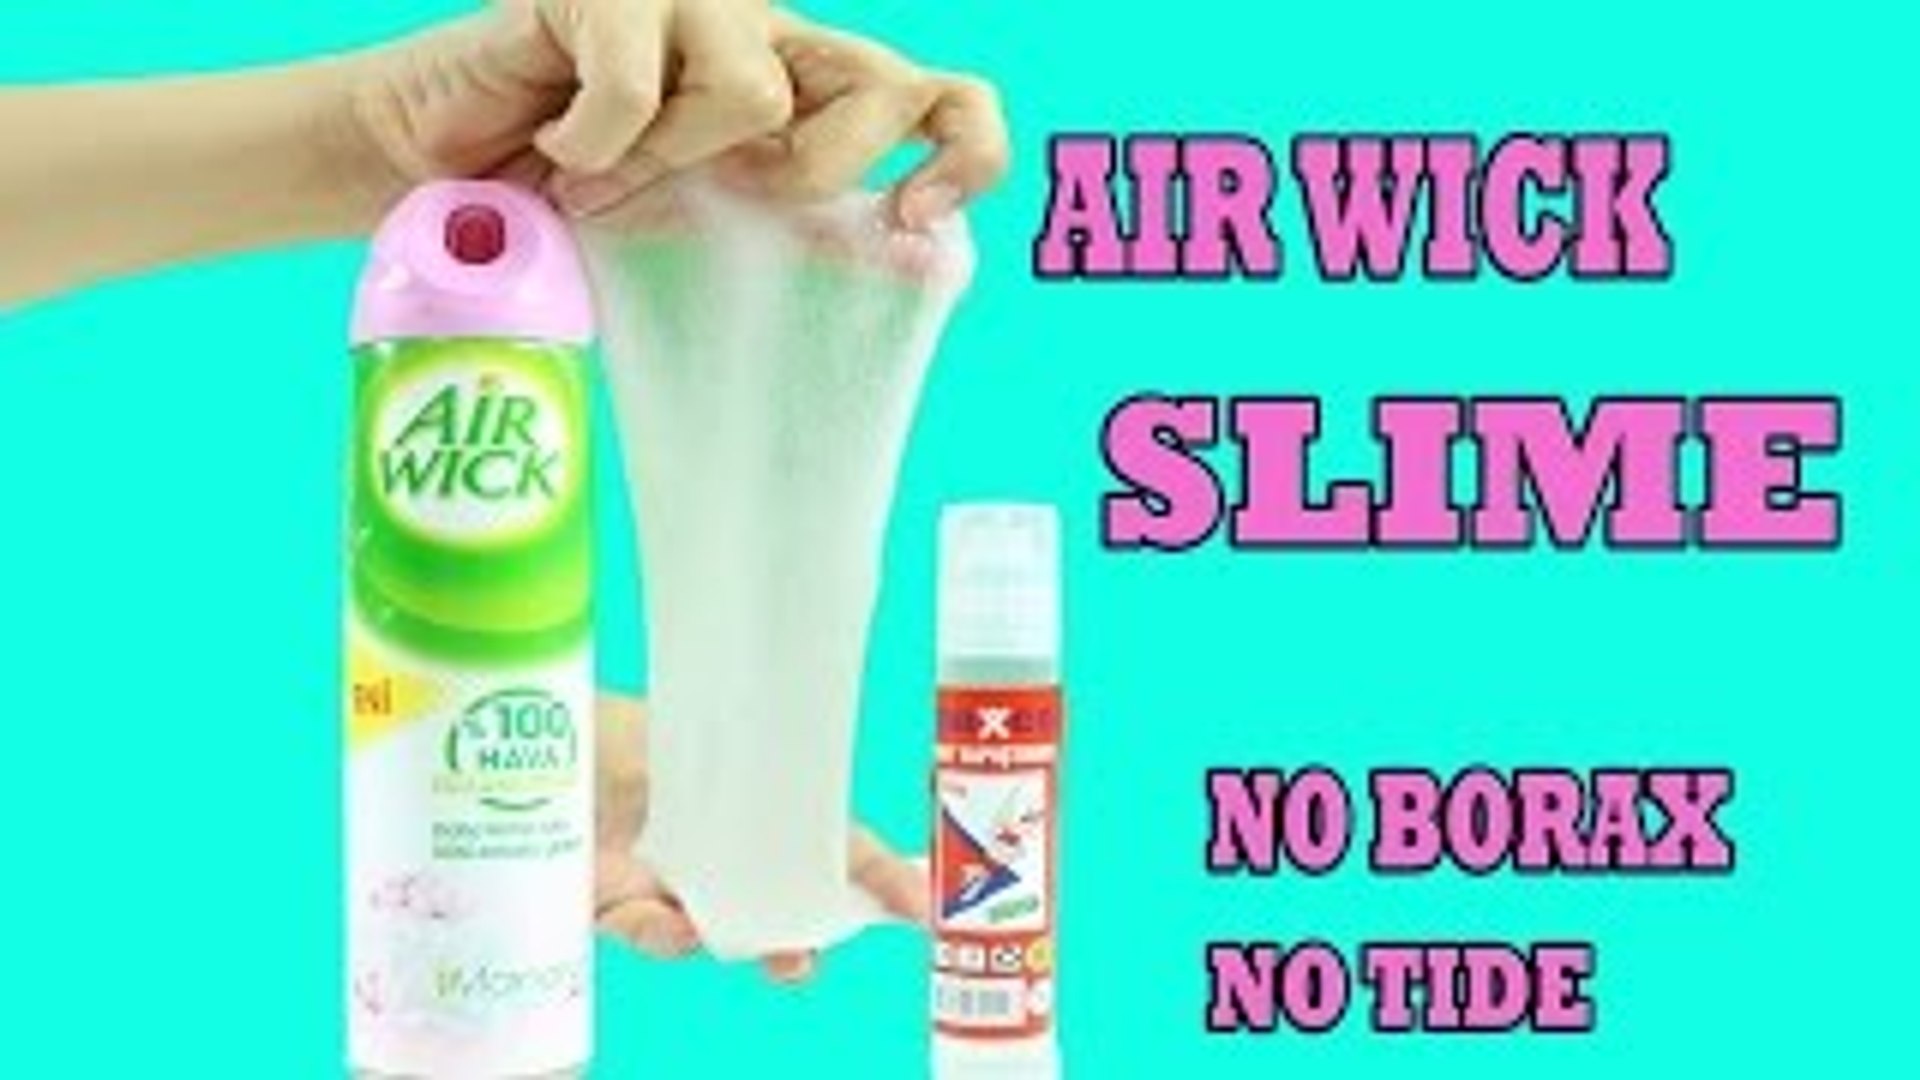 How To Make Slime With Air Wick Air Freshener And Glue No Borax Liquid Starch Detergen